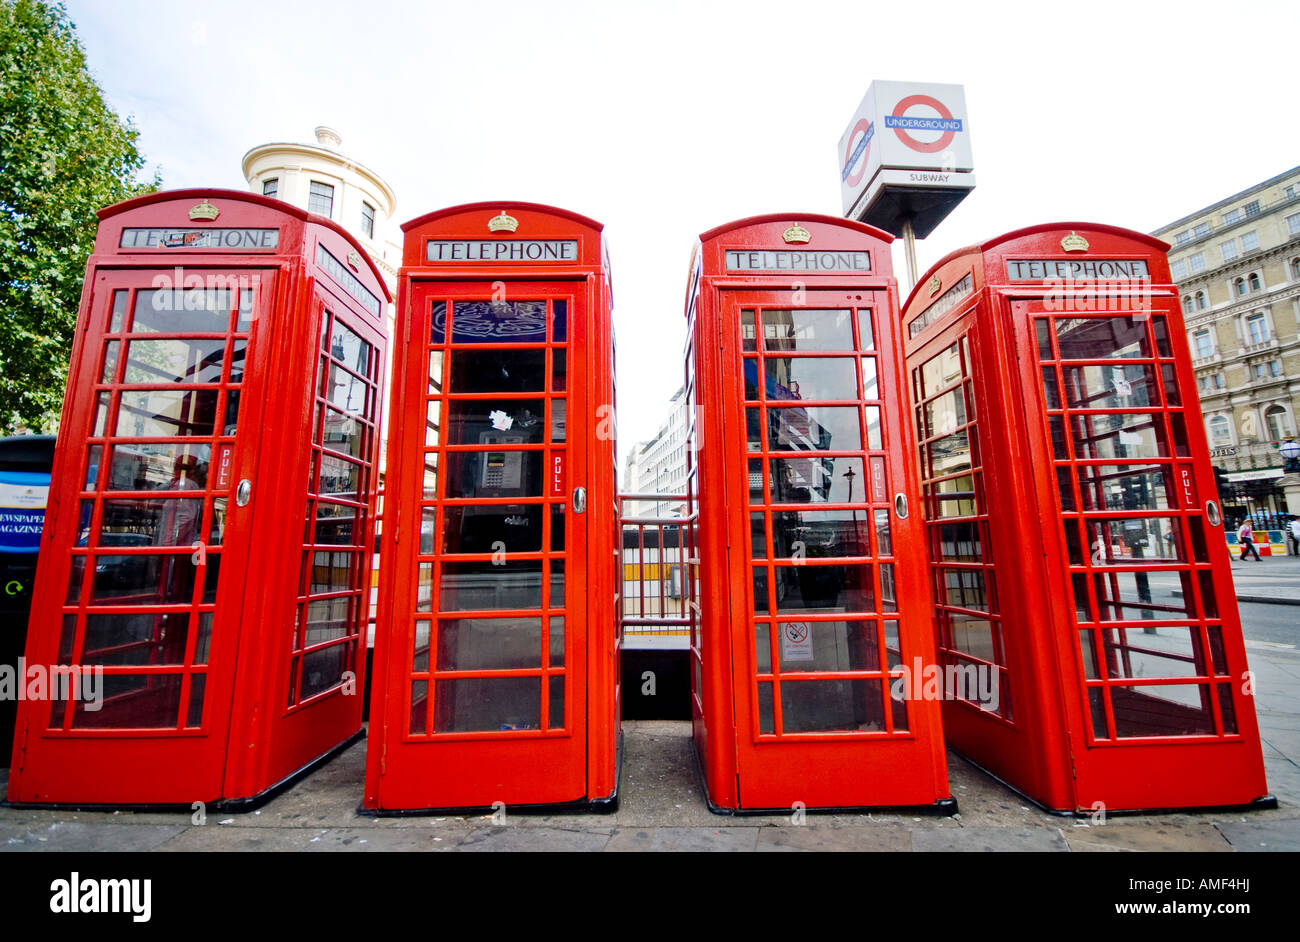 Four English red telephone booths and underground sign in London Stock Photo